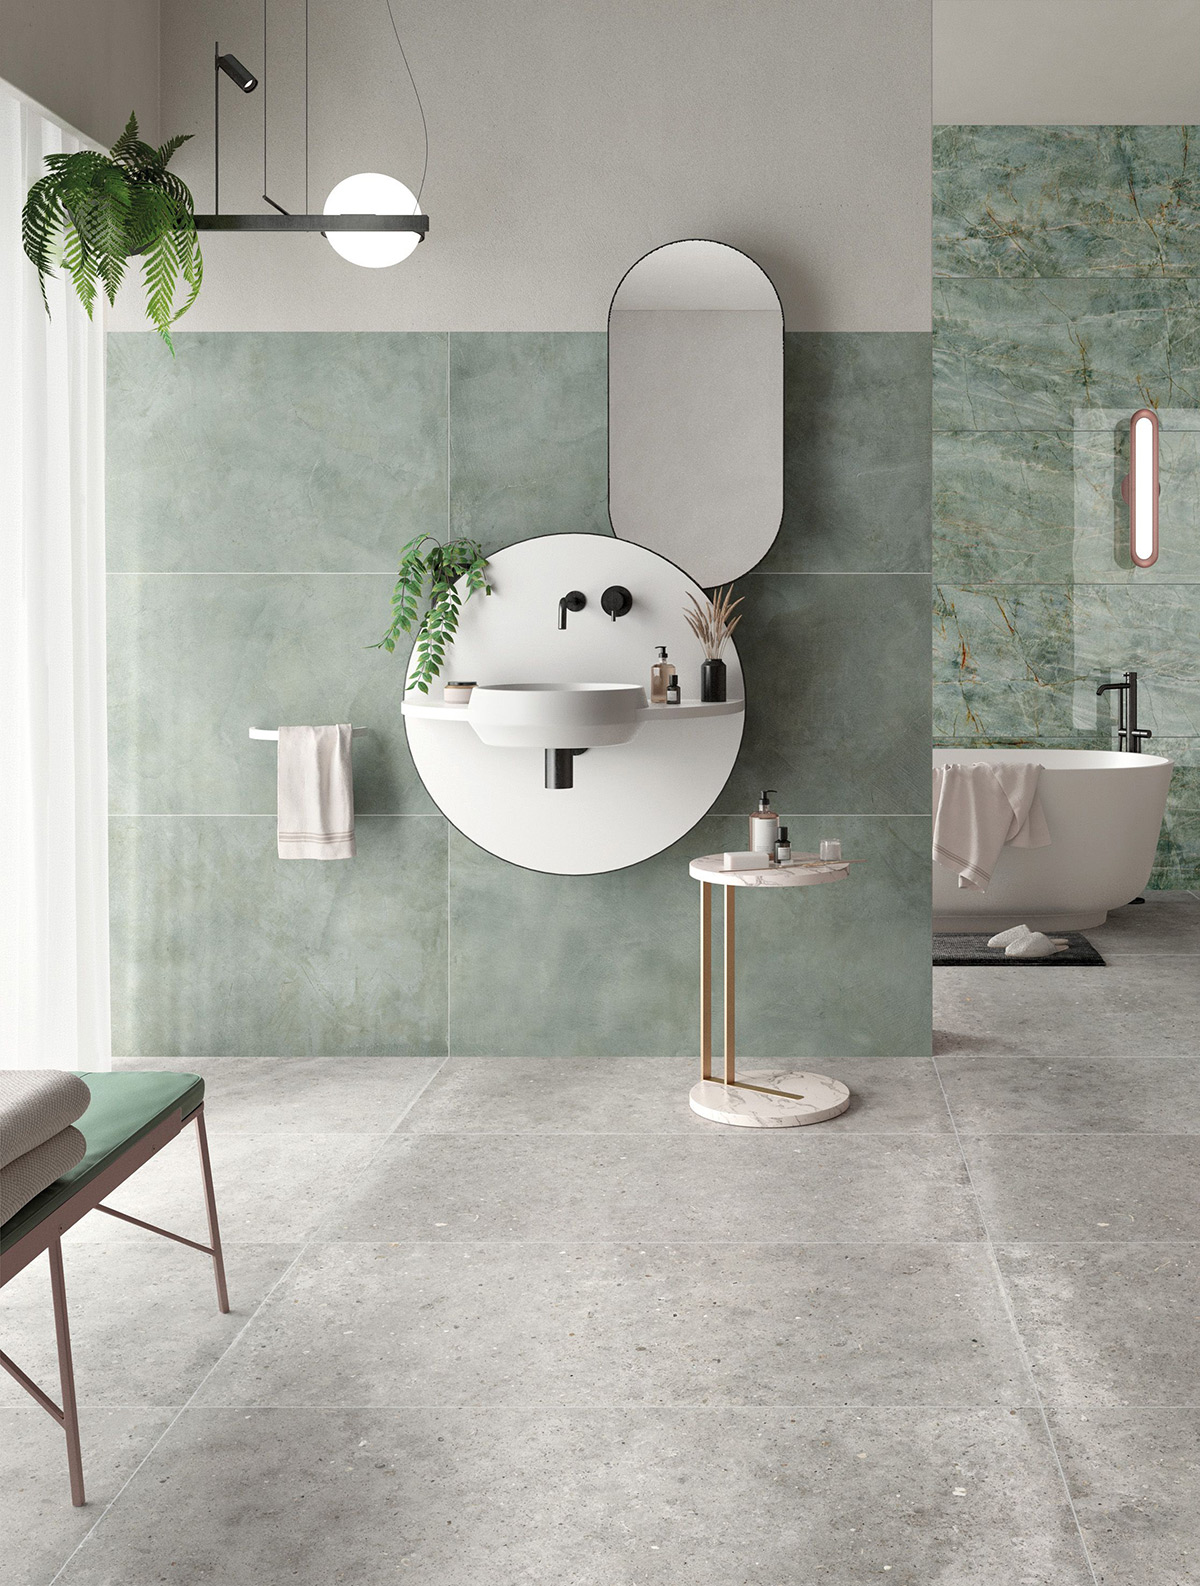 Large-format green tiles increase the sense of space in a bathroom.